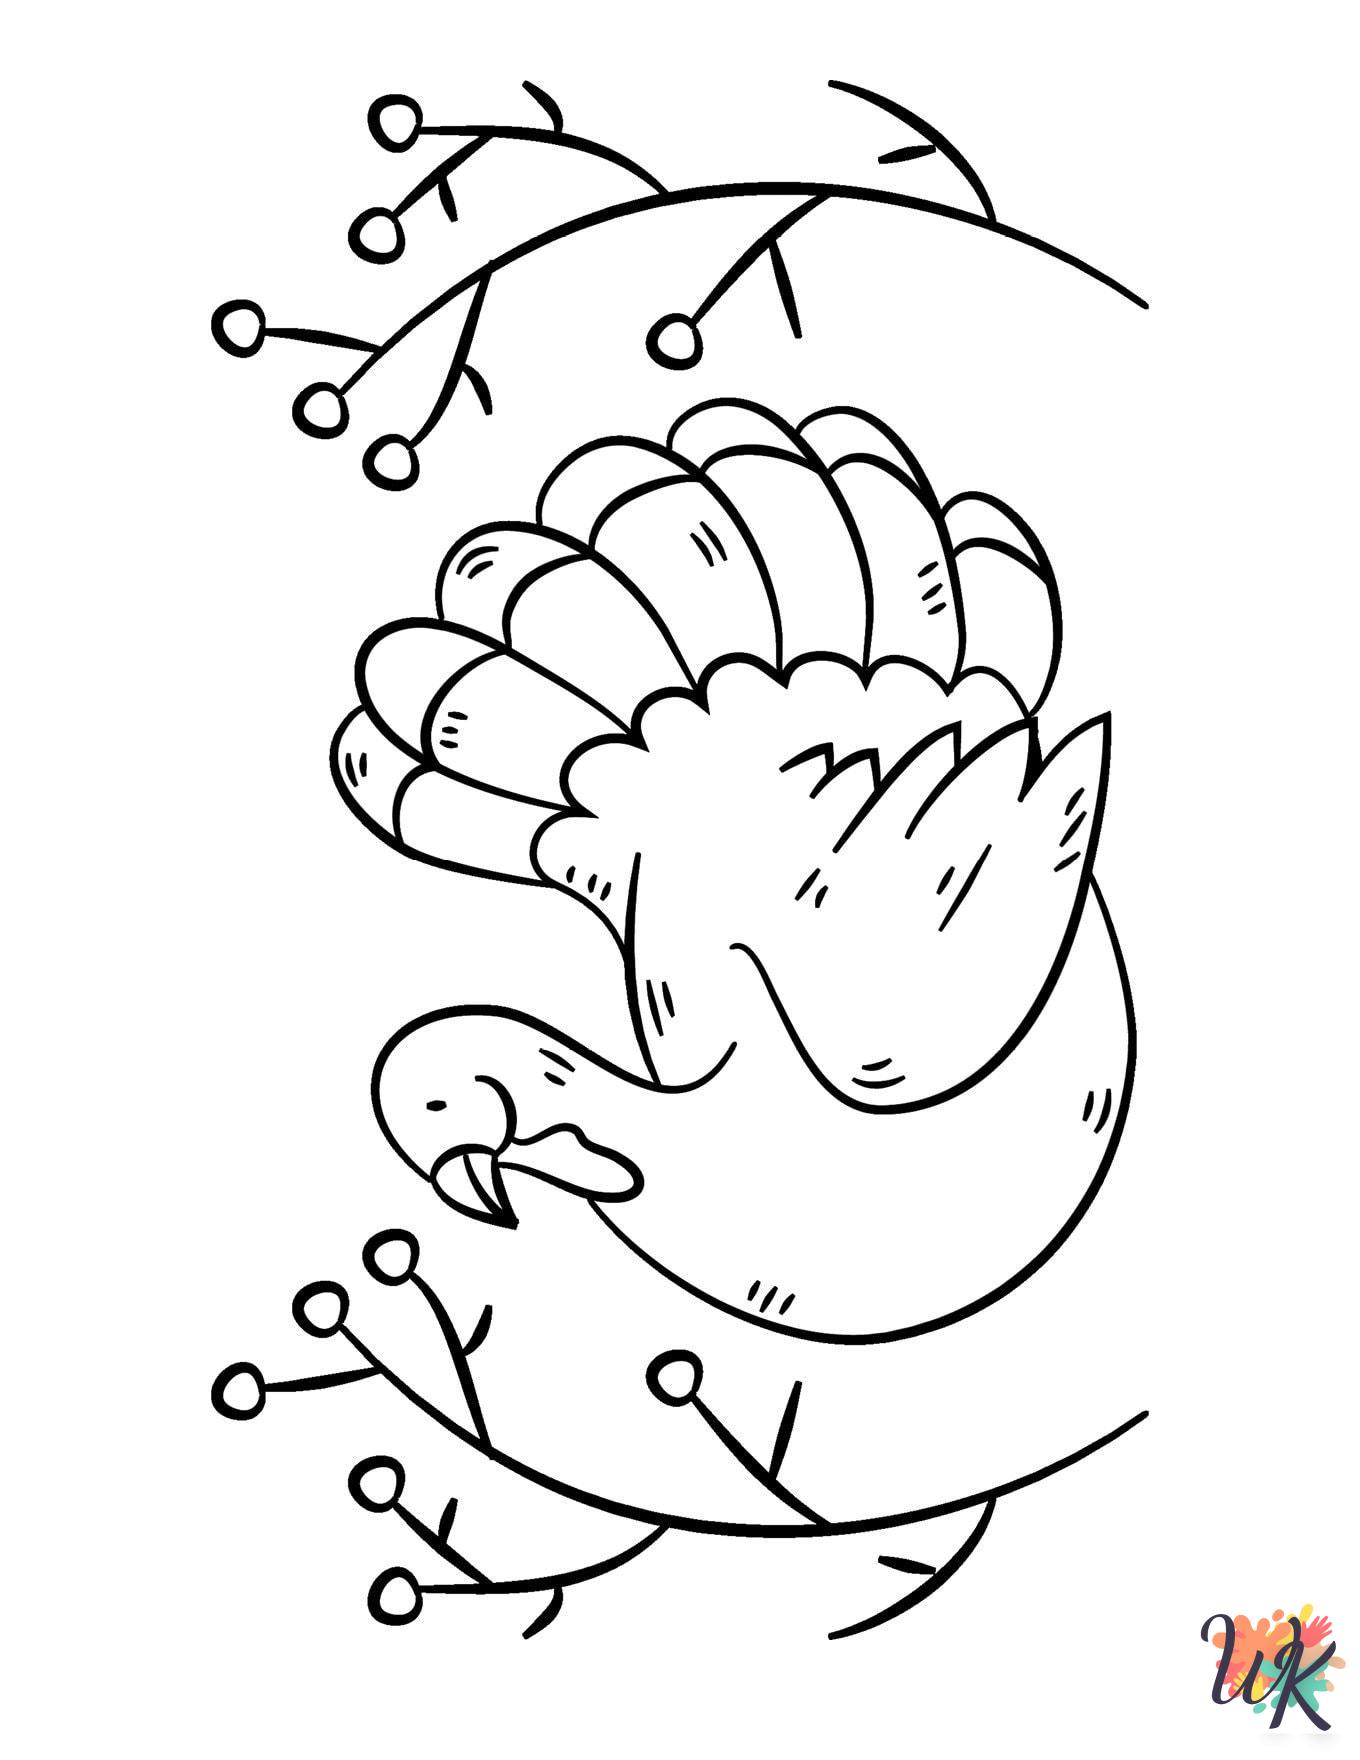 Turkey coloring pages to print